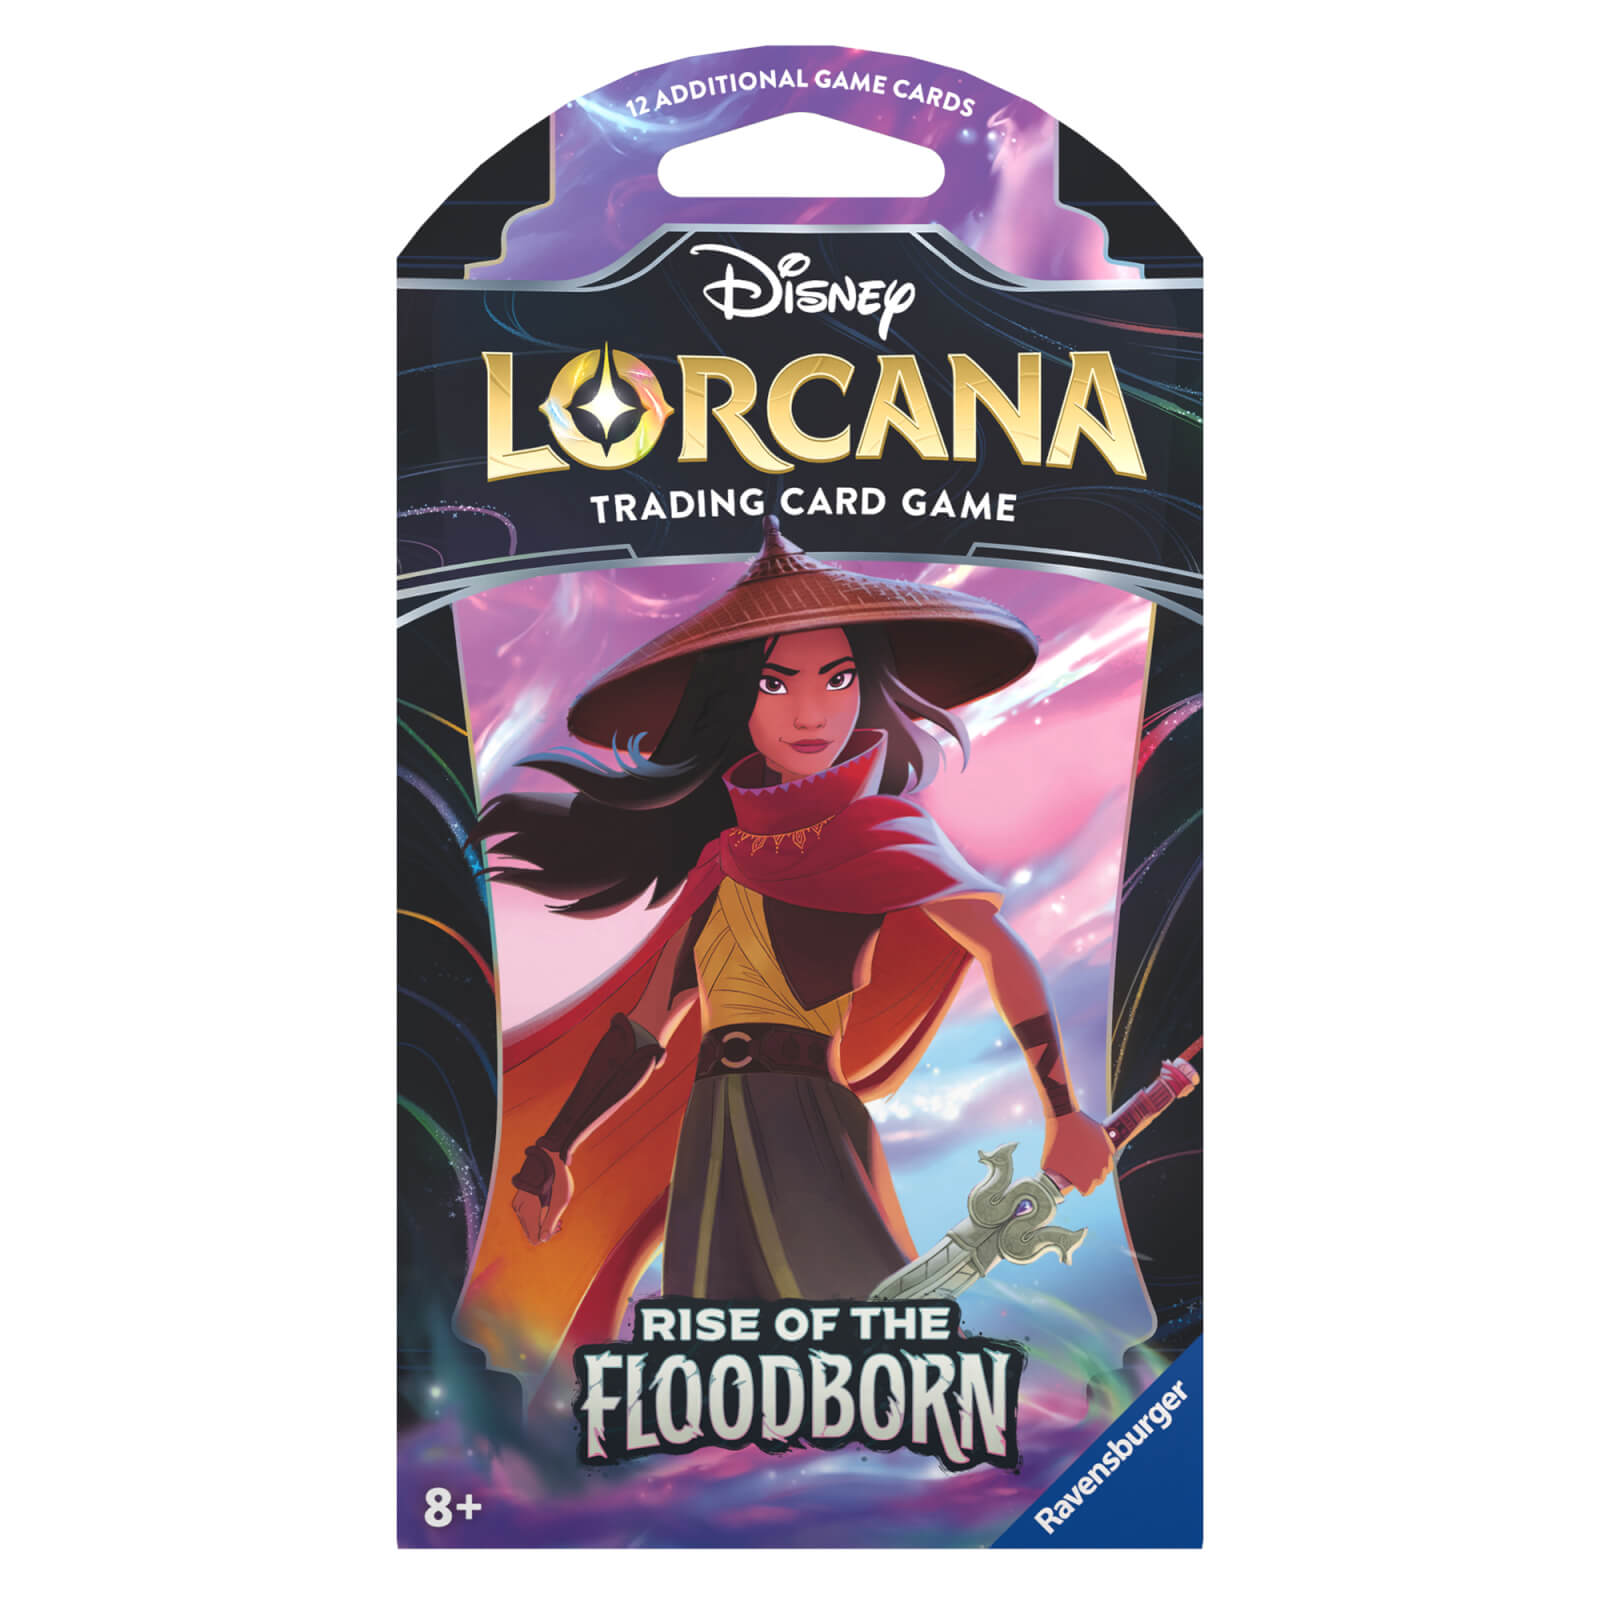 Image of Disney Lorcana Trading Card Game Rise of the Floodborn Sleeved Booster Packs Box (42 Packs)